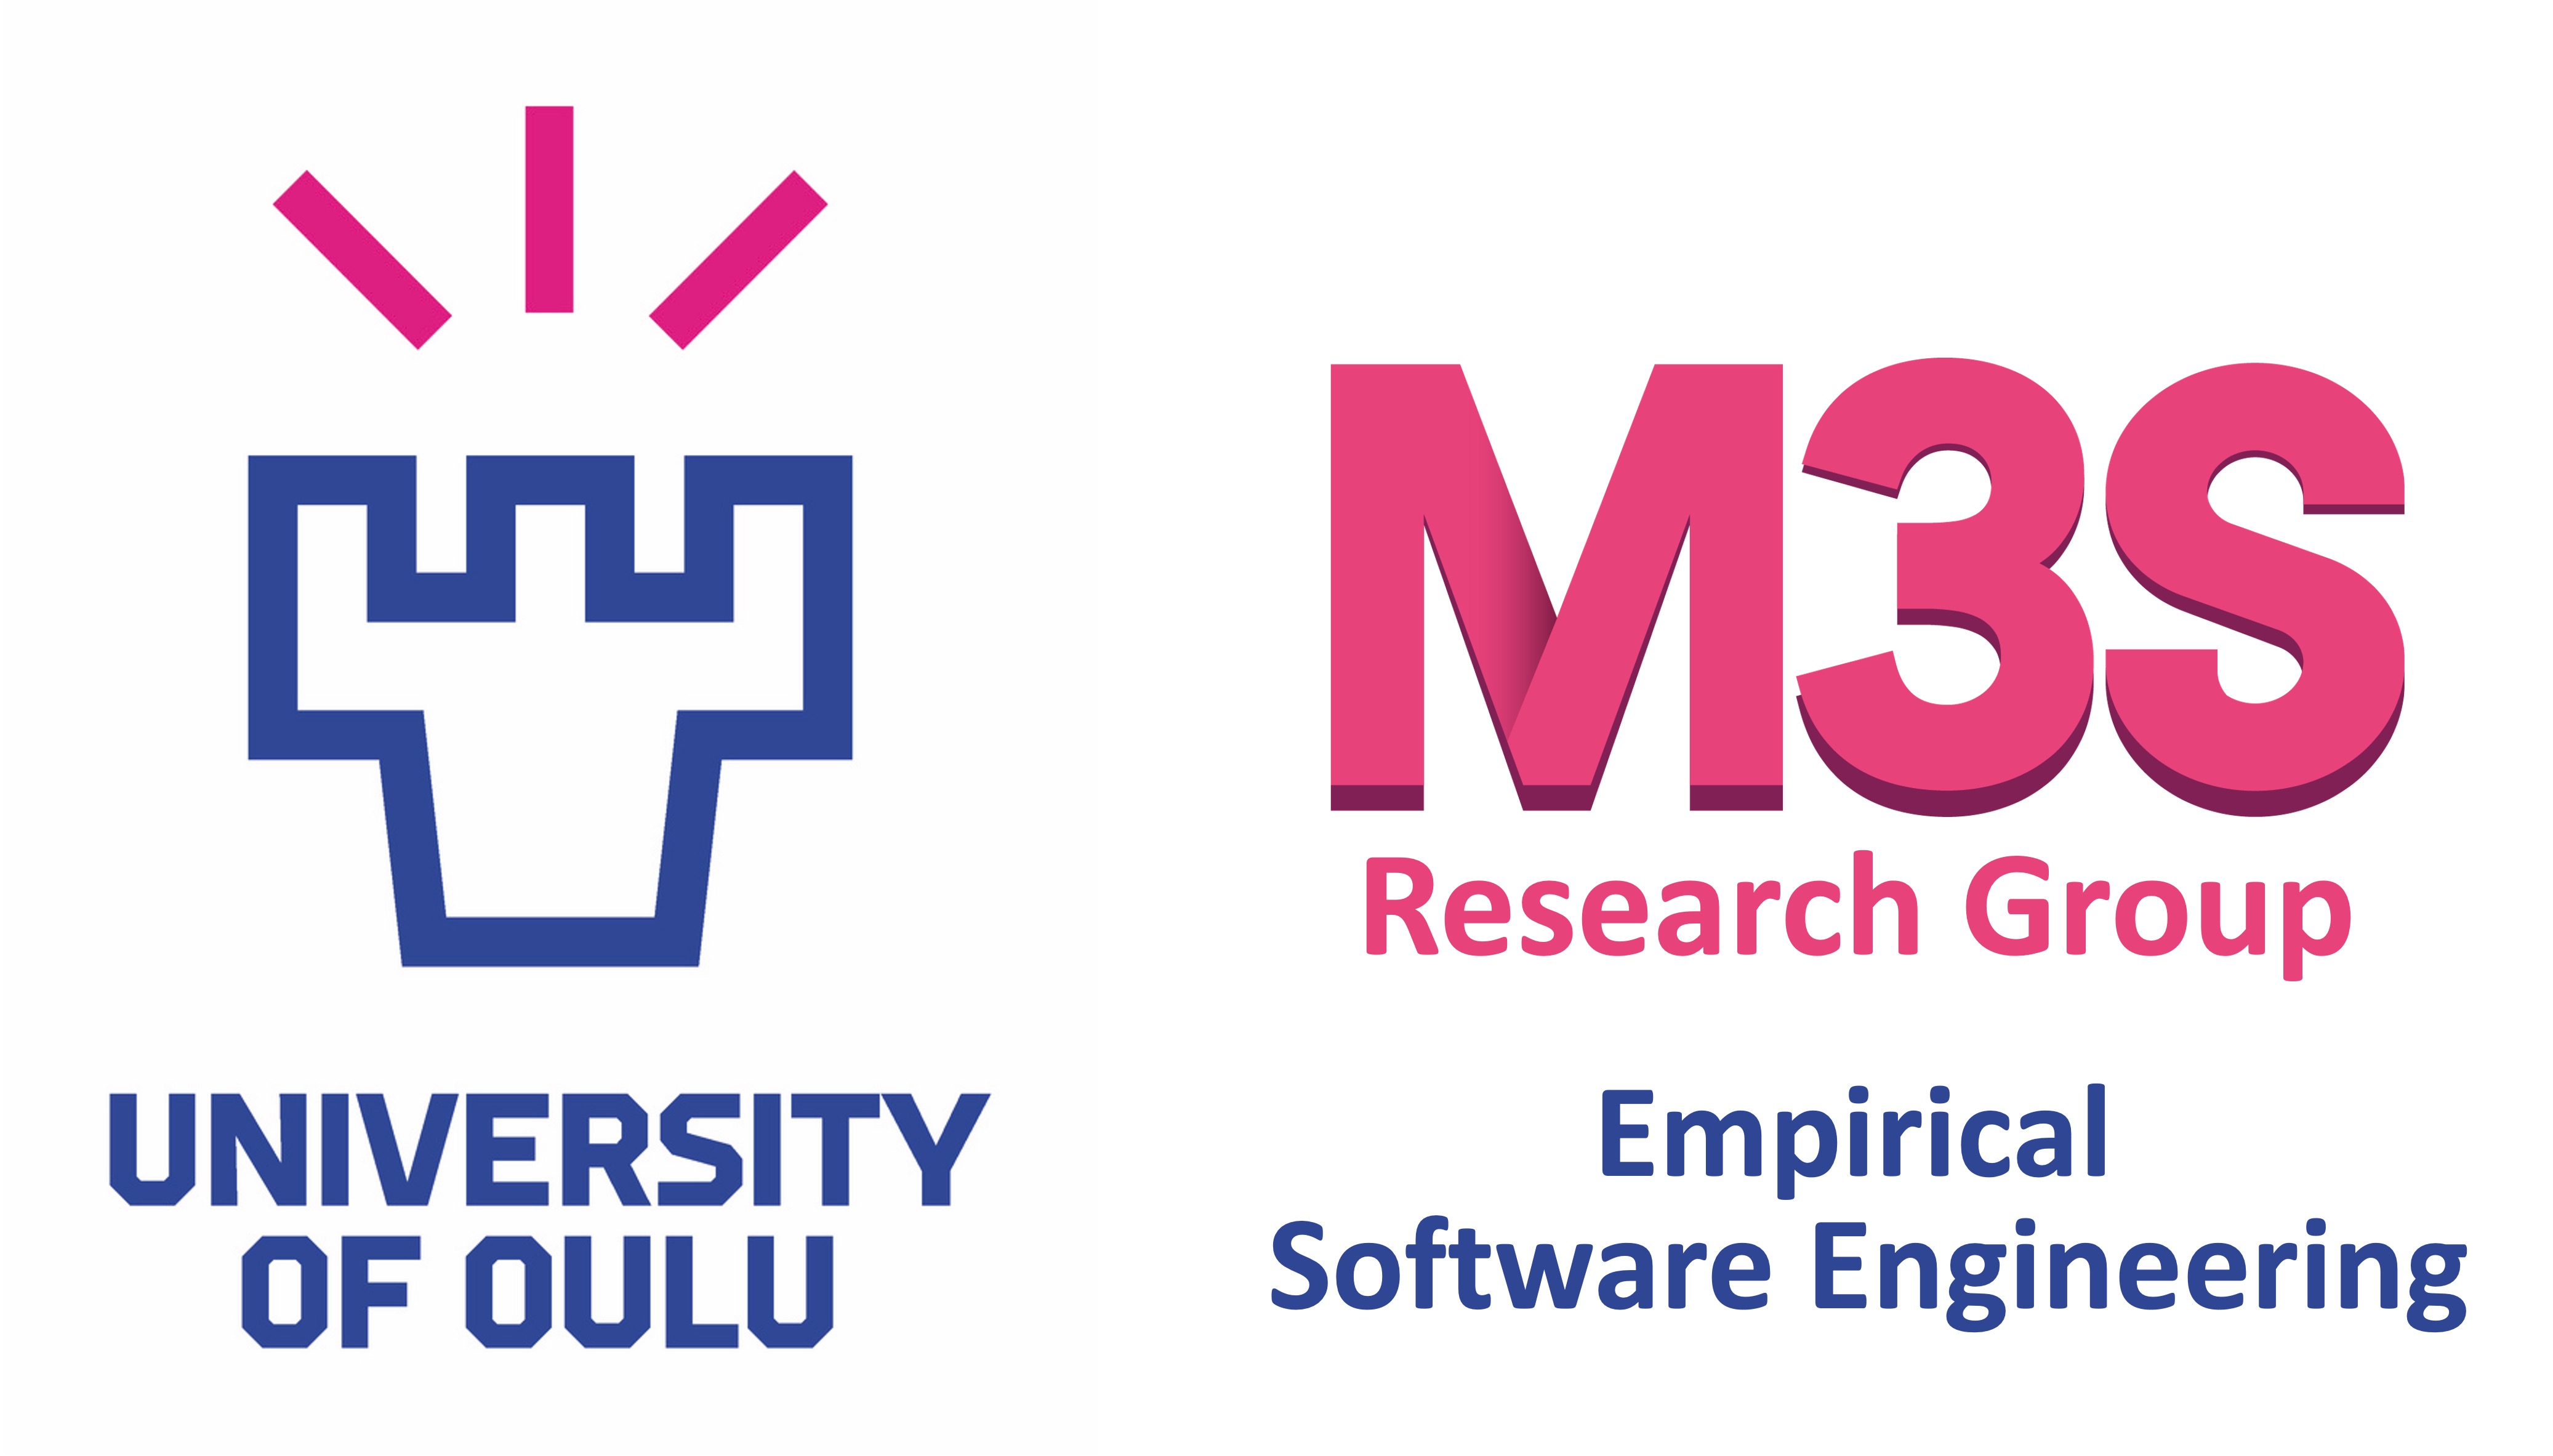 University of Oulu M3S Research Group 